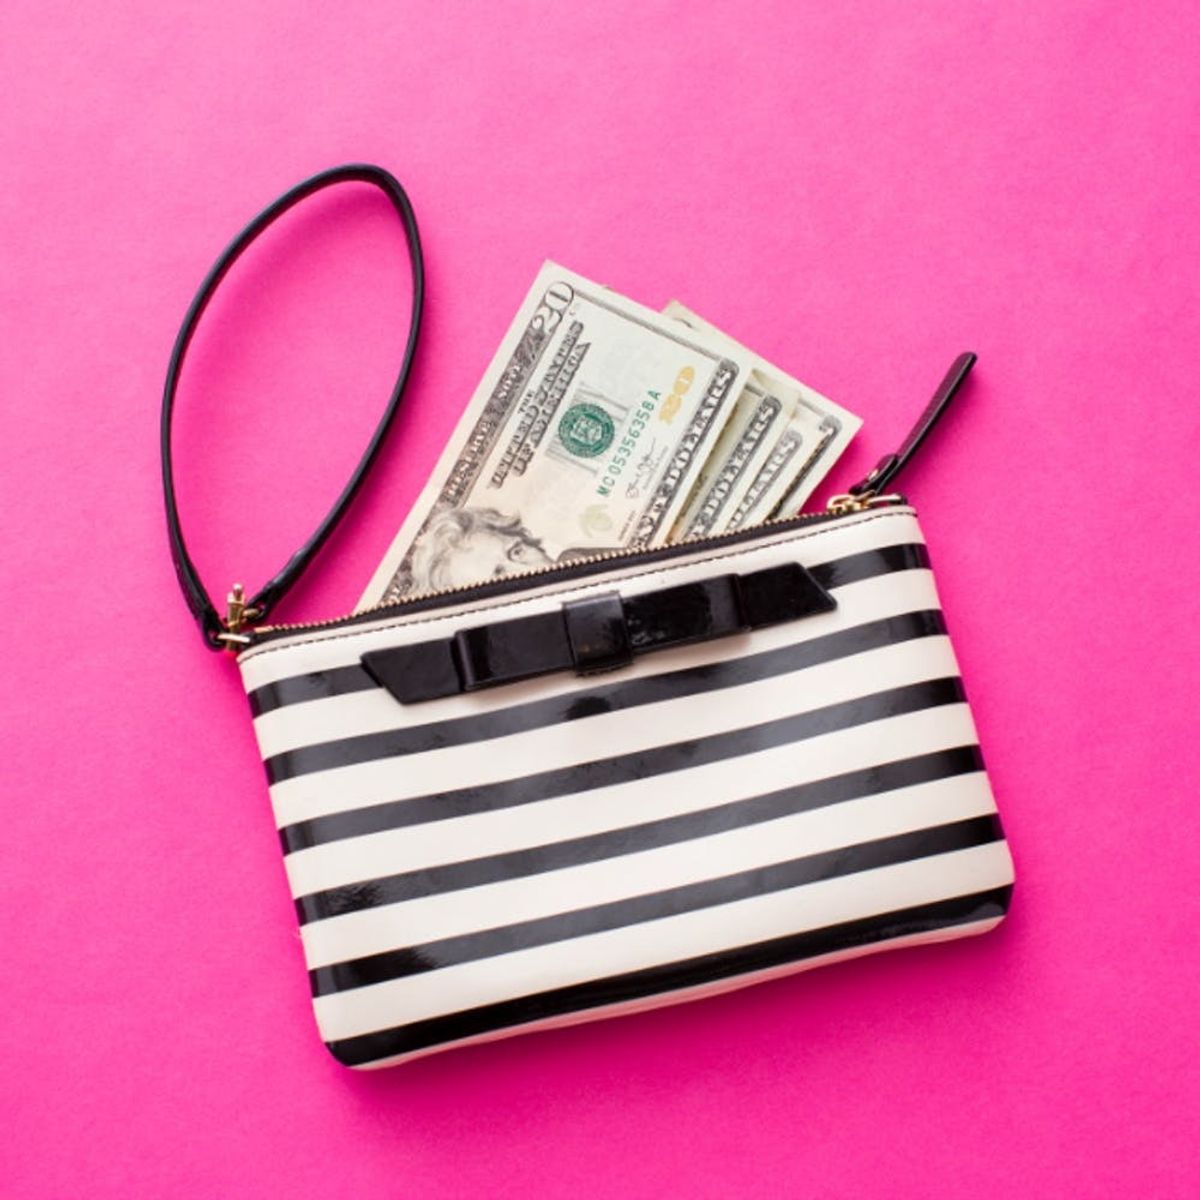 Spring Clean Your Finances in 4 Simple Steps